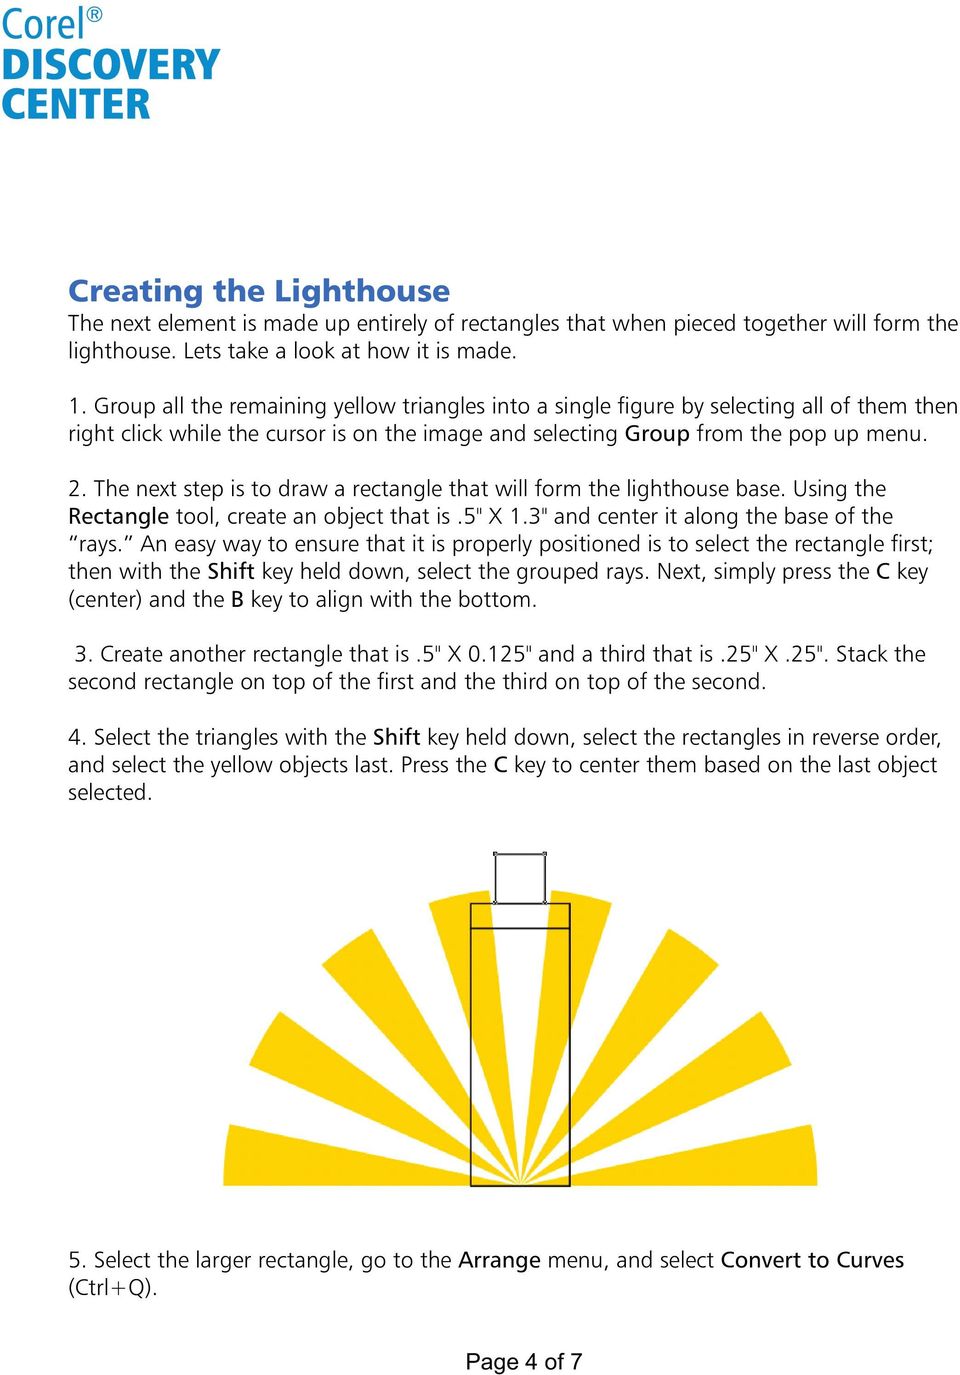 The next step is to draw a rectangle that will form the lighthouse base. Using the Rectangle tool, create an object that is.5" X 1.3" and center it along the base of the rays.